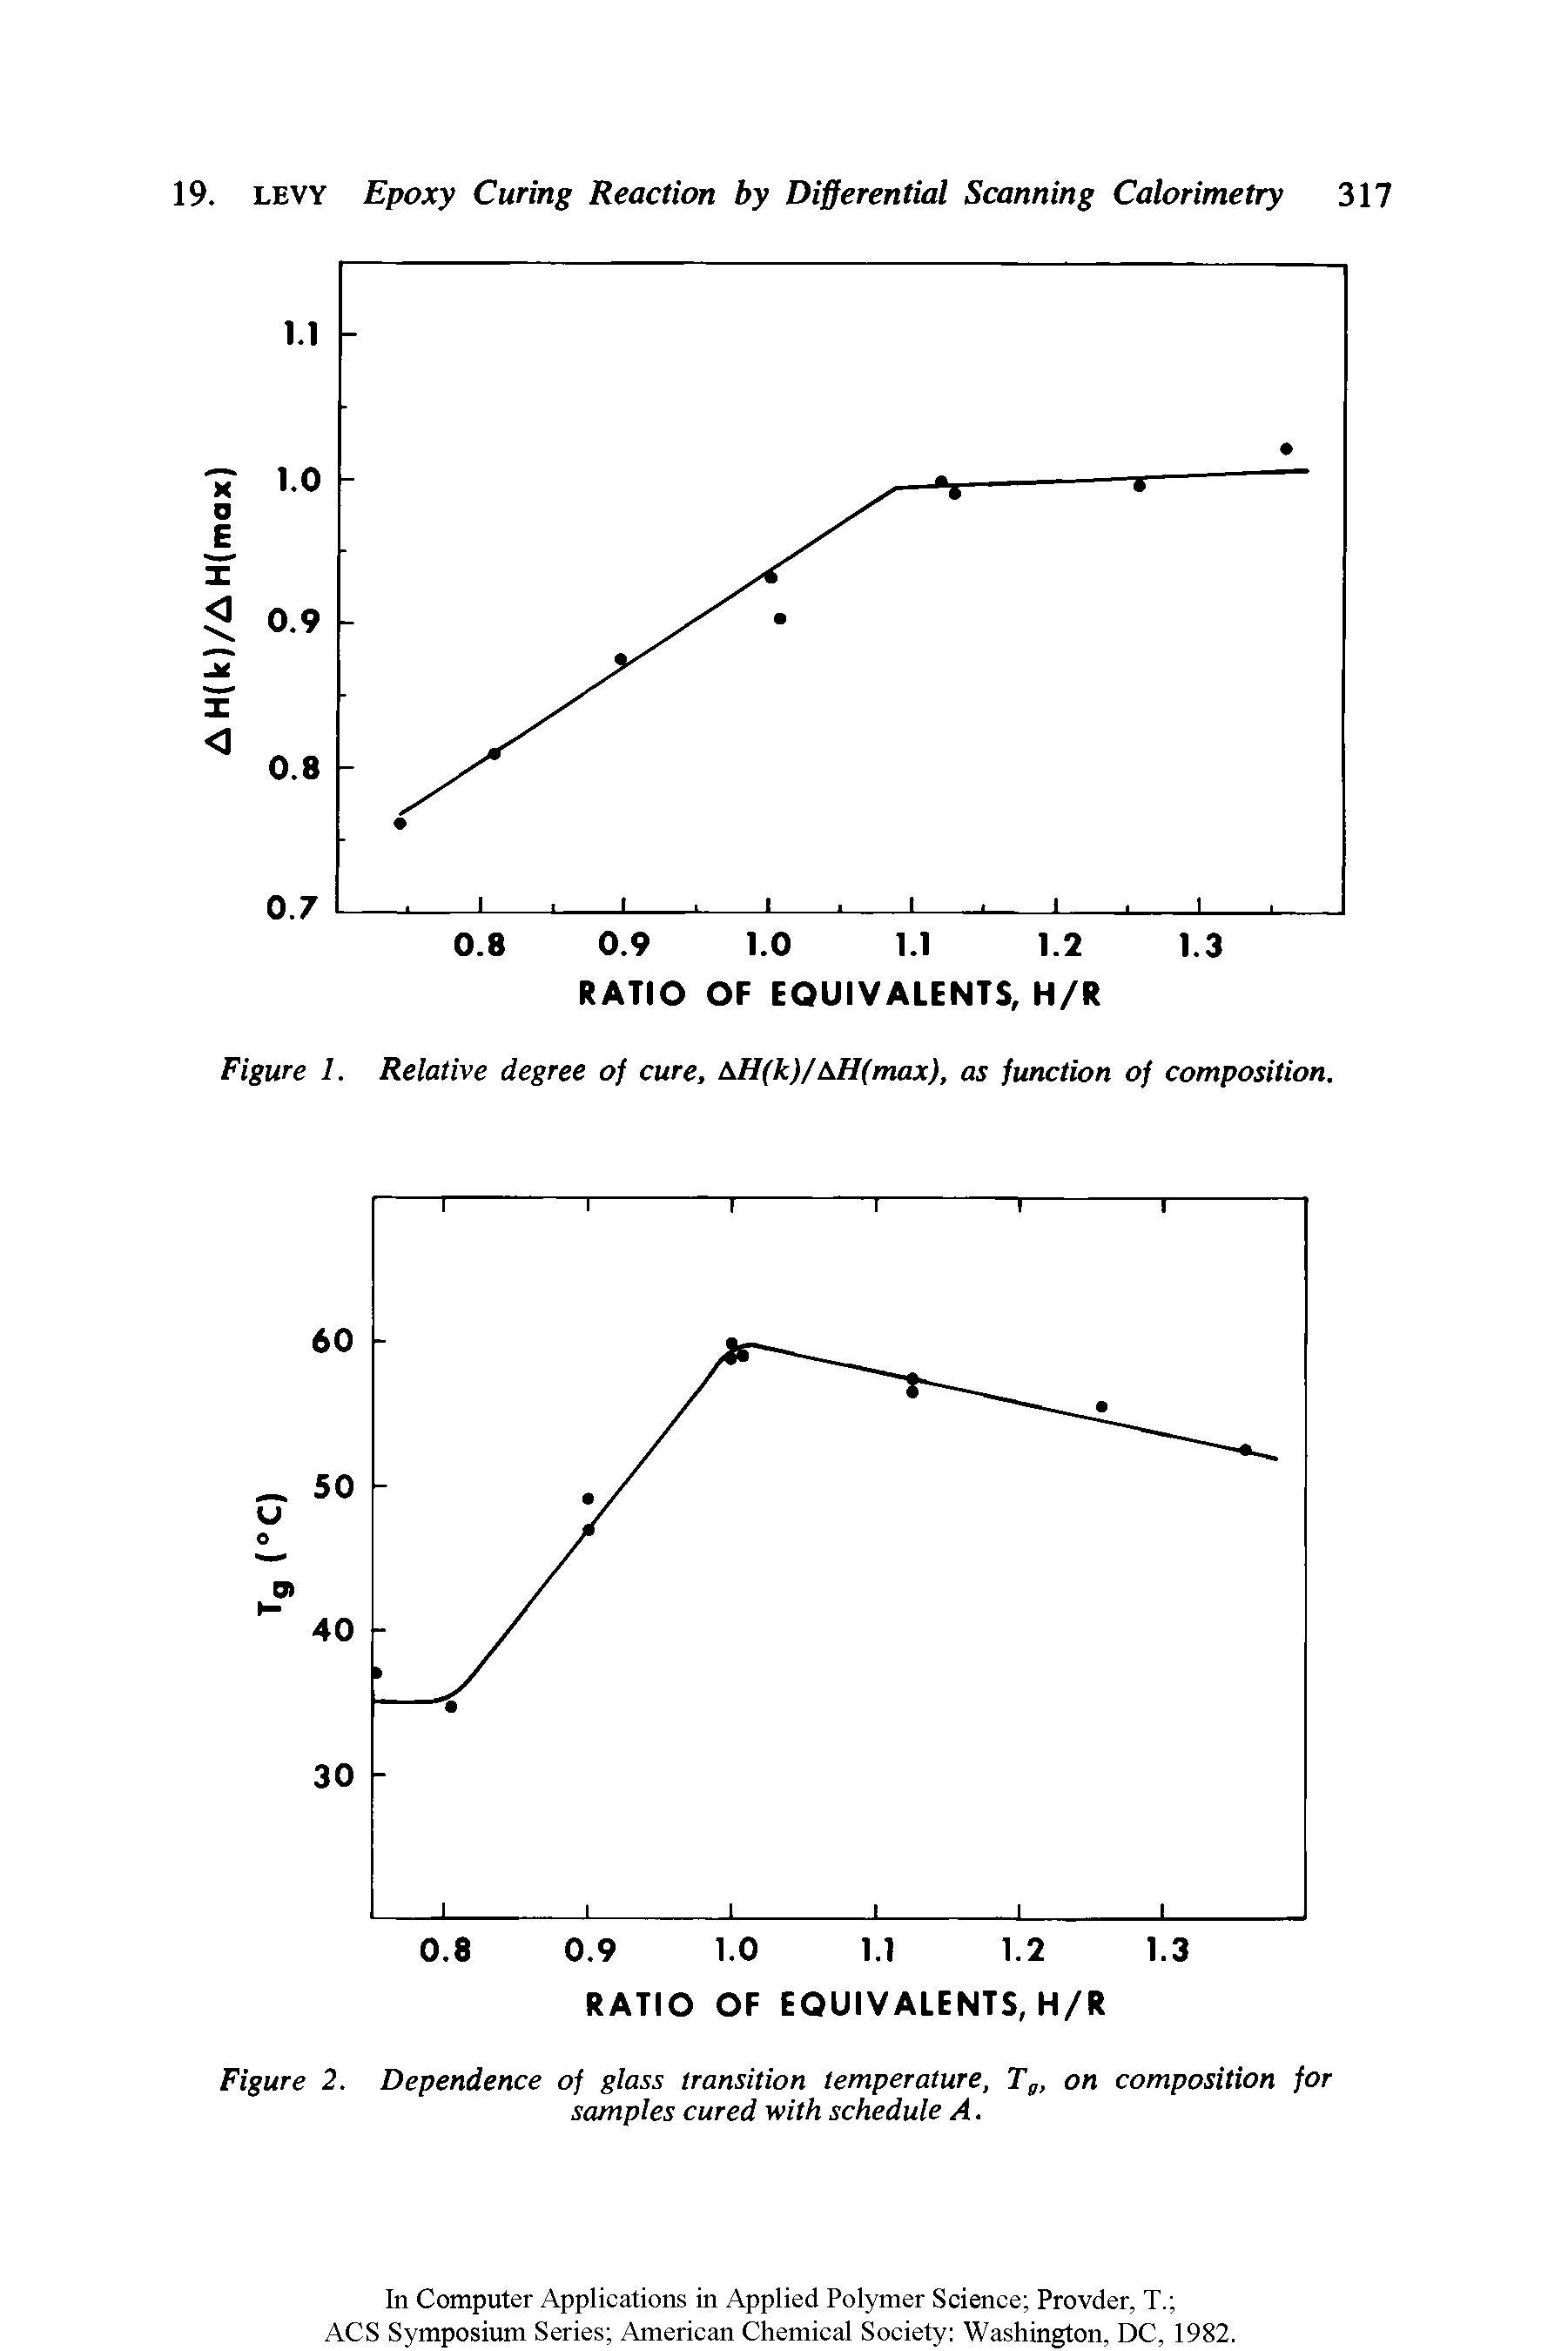 Figure 2. Dependence of glass transition temperature, T , on composition for samples cured with schedule A.